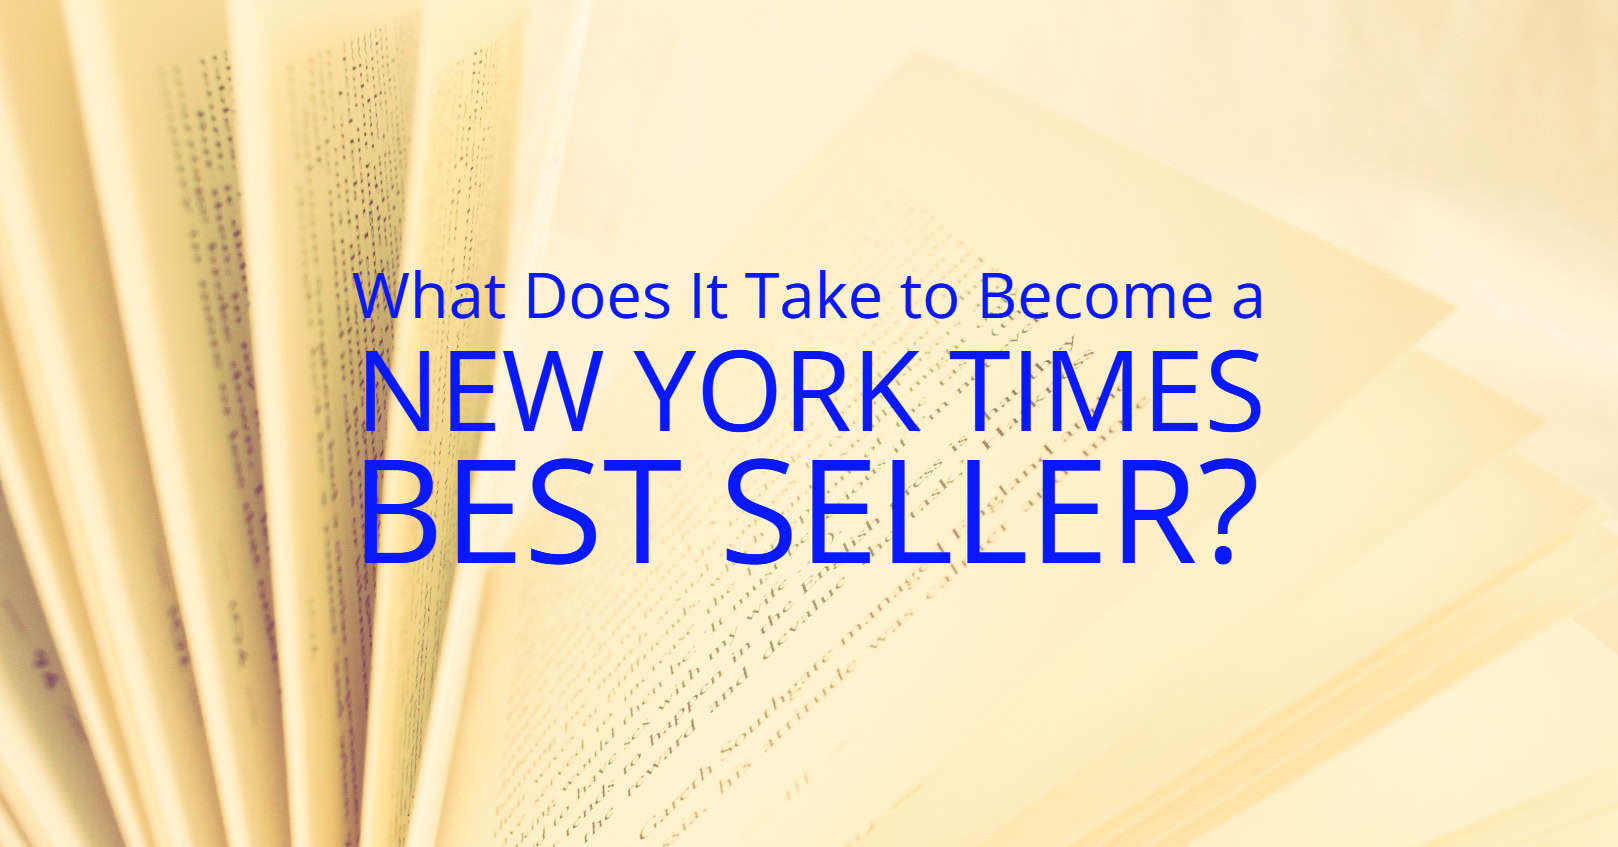 What Does it Take to Become a New York Times Bestseller?